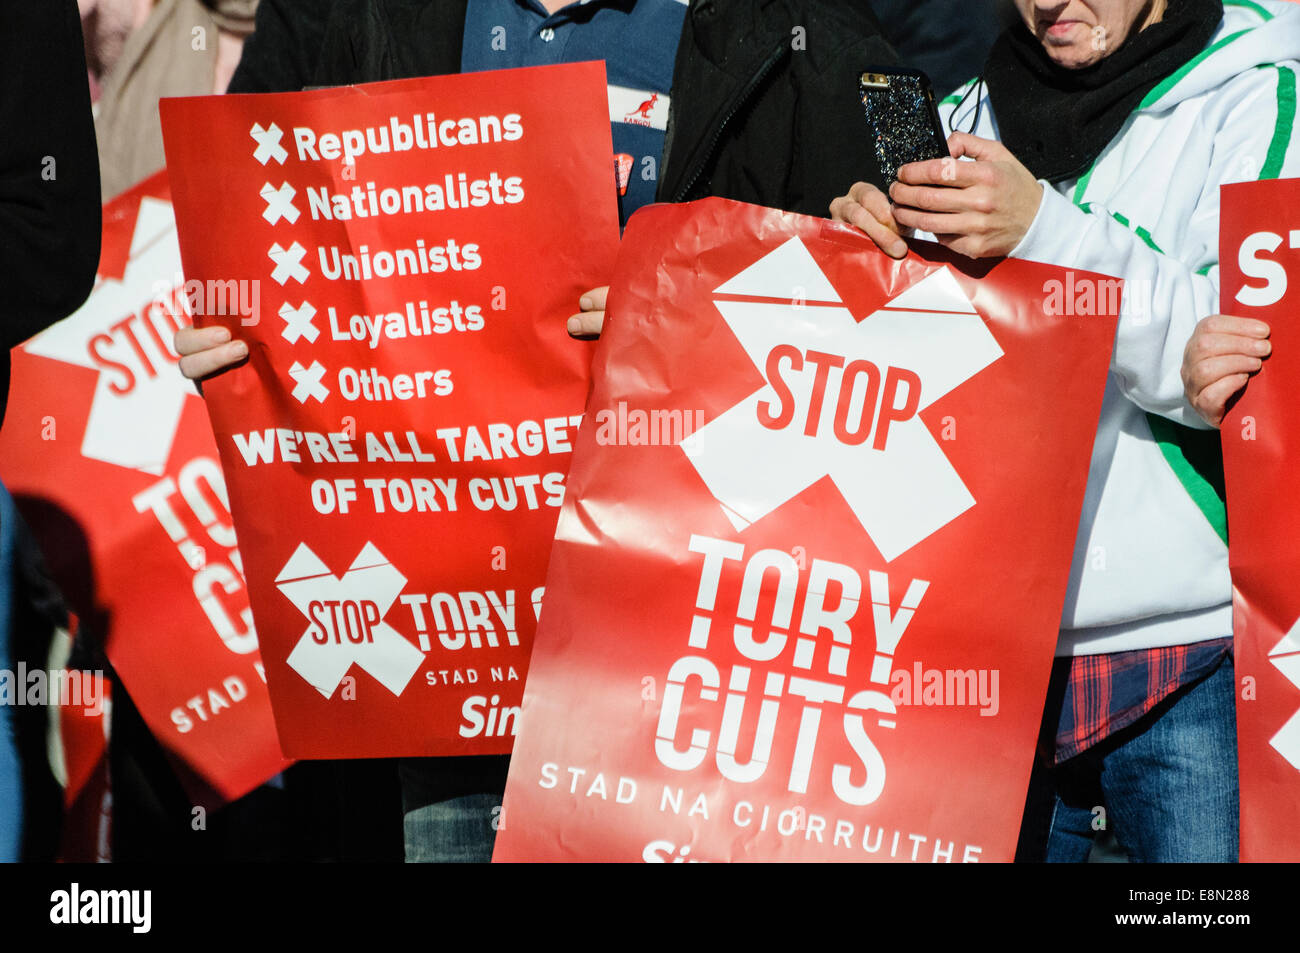 Belfast, Northern Ireland. 11/10/2014 - Banners calling for the end of Tory austerity cuts at a protest. Stock Photo